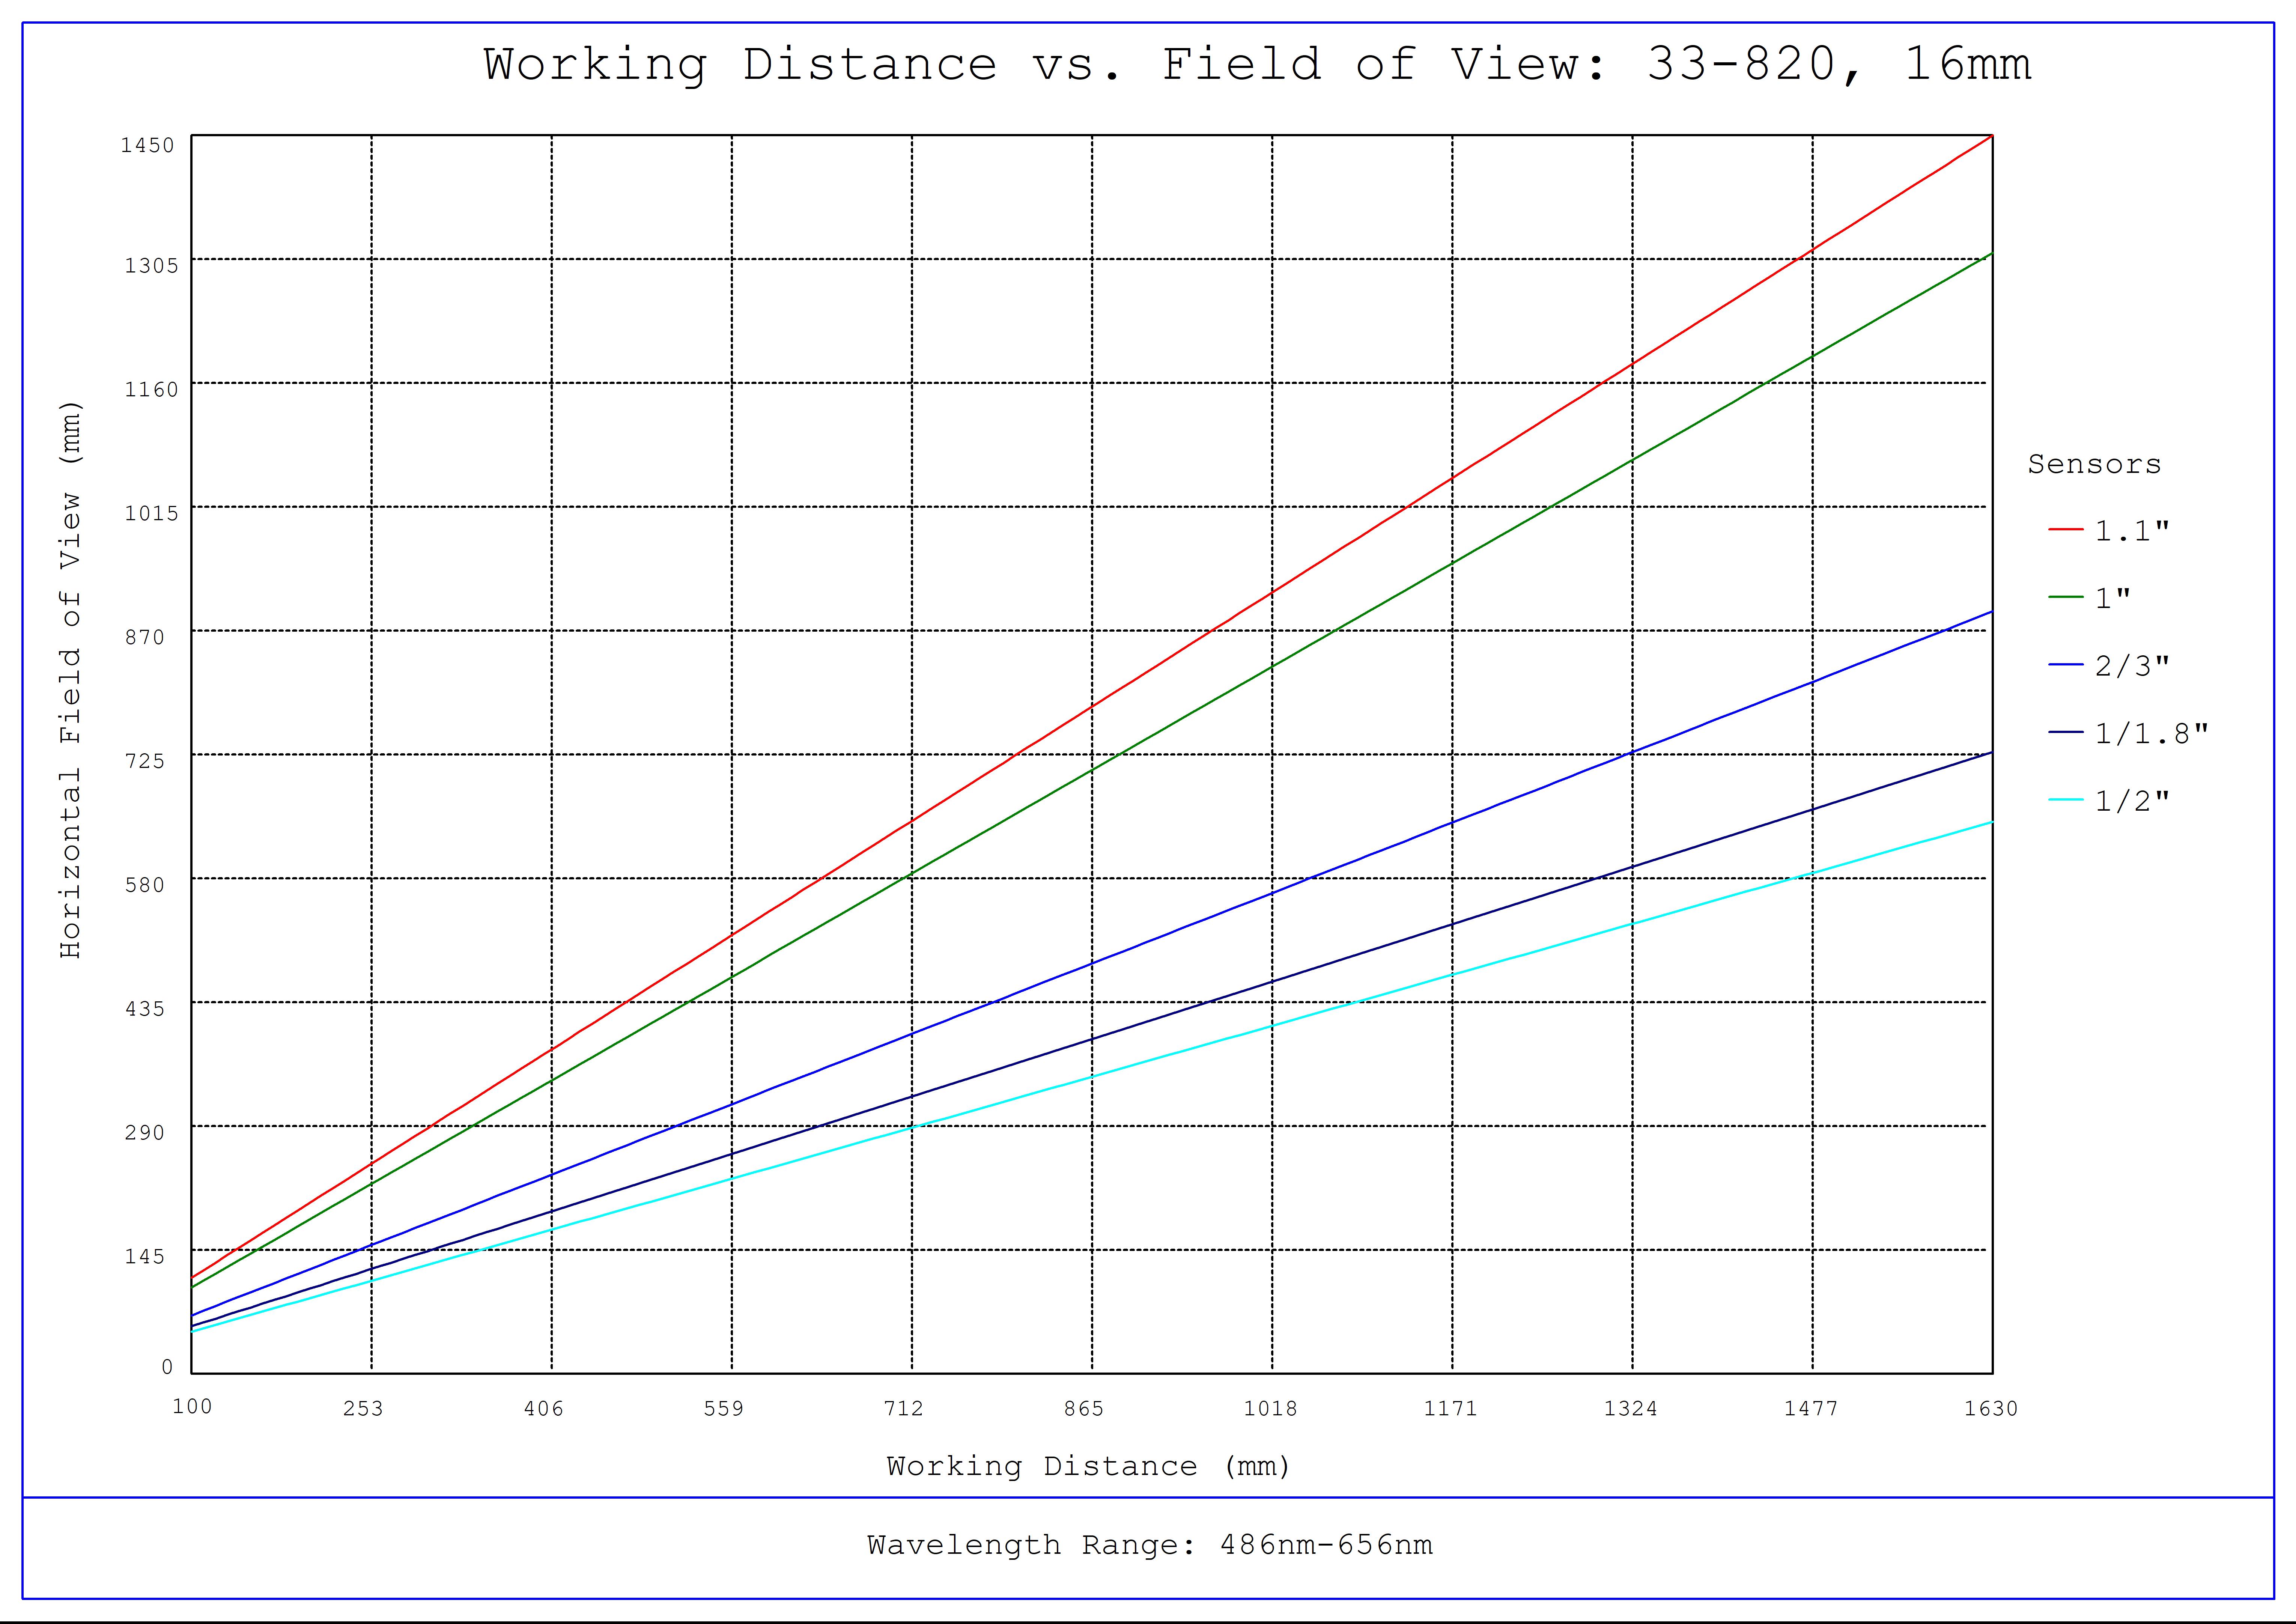 #33-820, 16mm f/16, HPi Series Fixed Focal Length Lens, Working Distance versus Field of View Plot